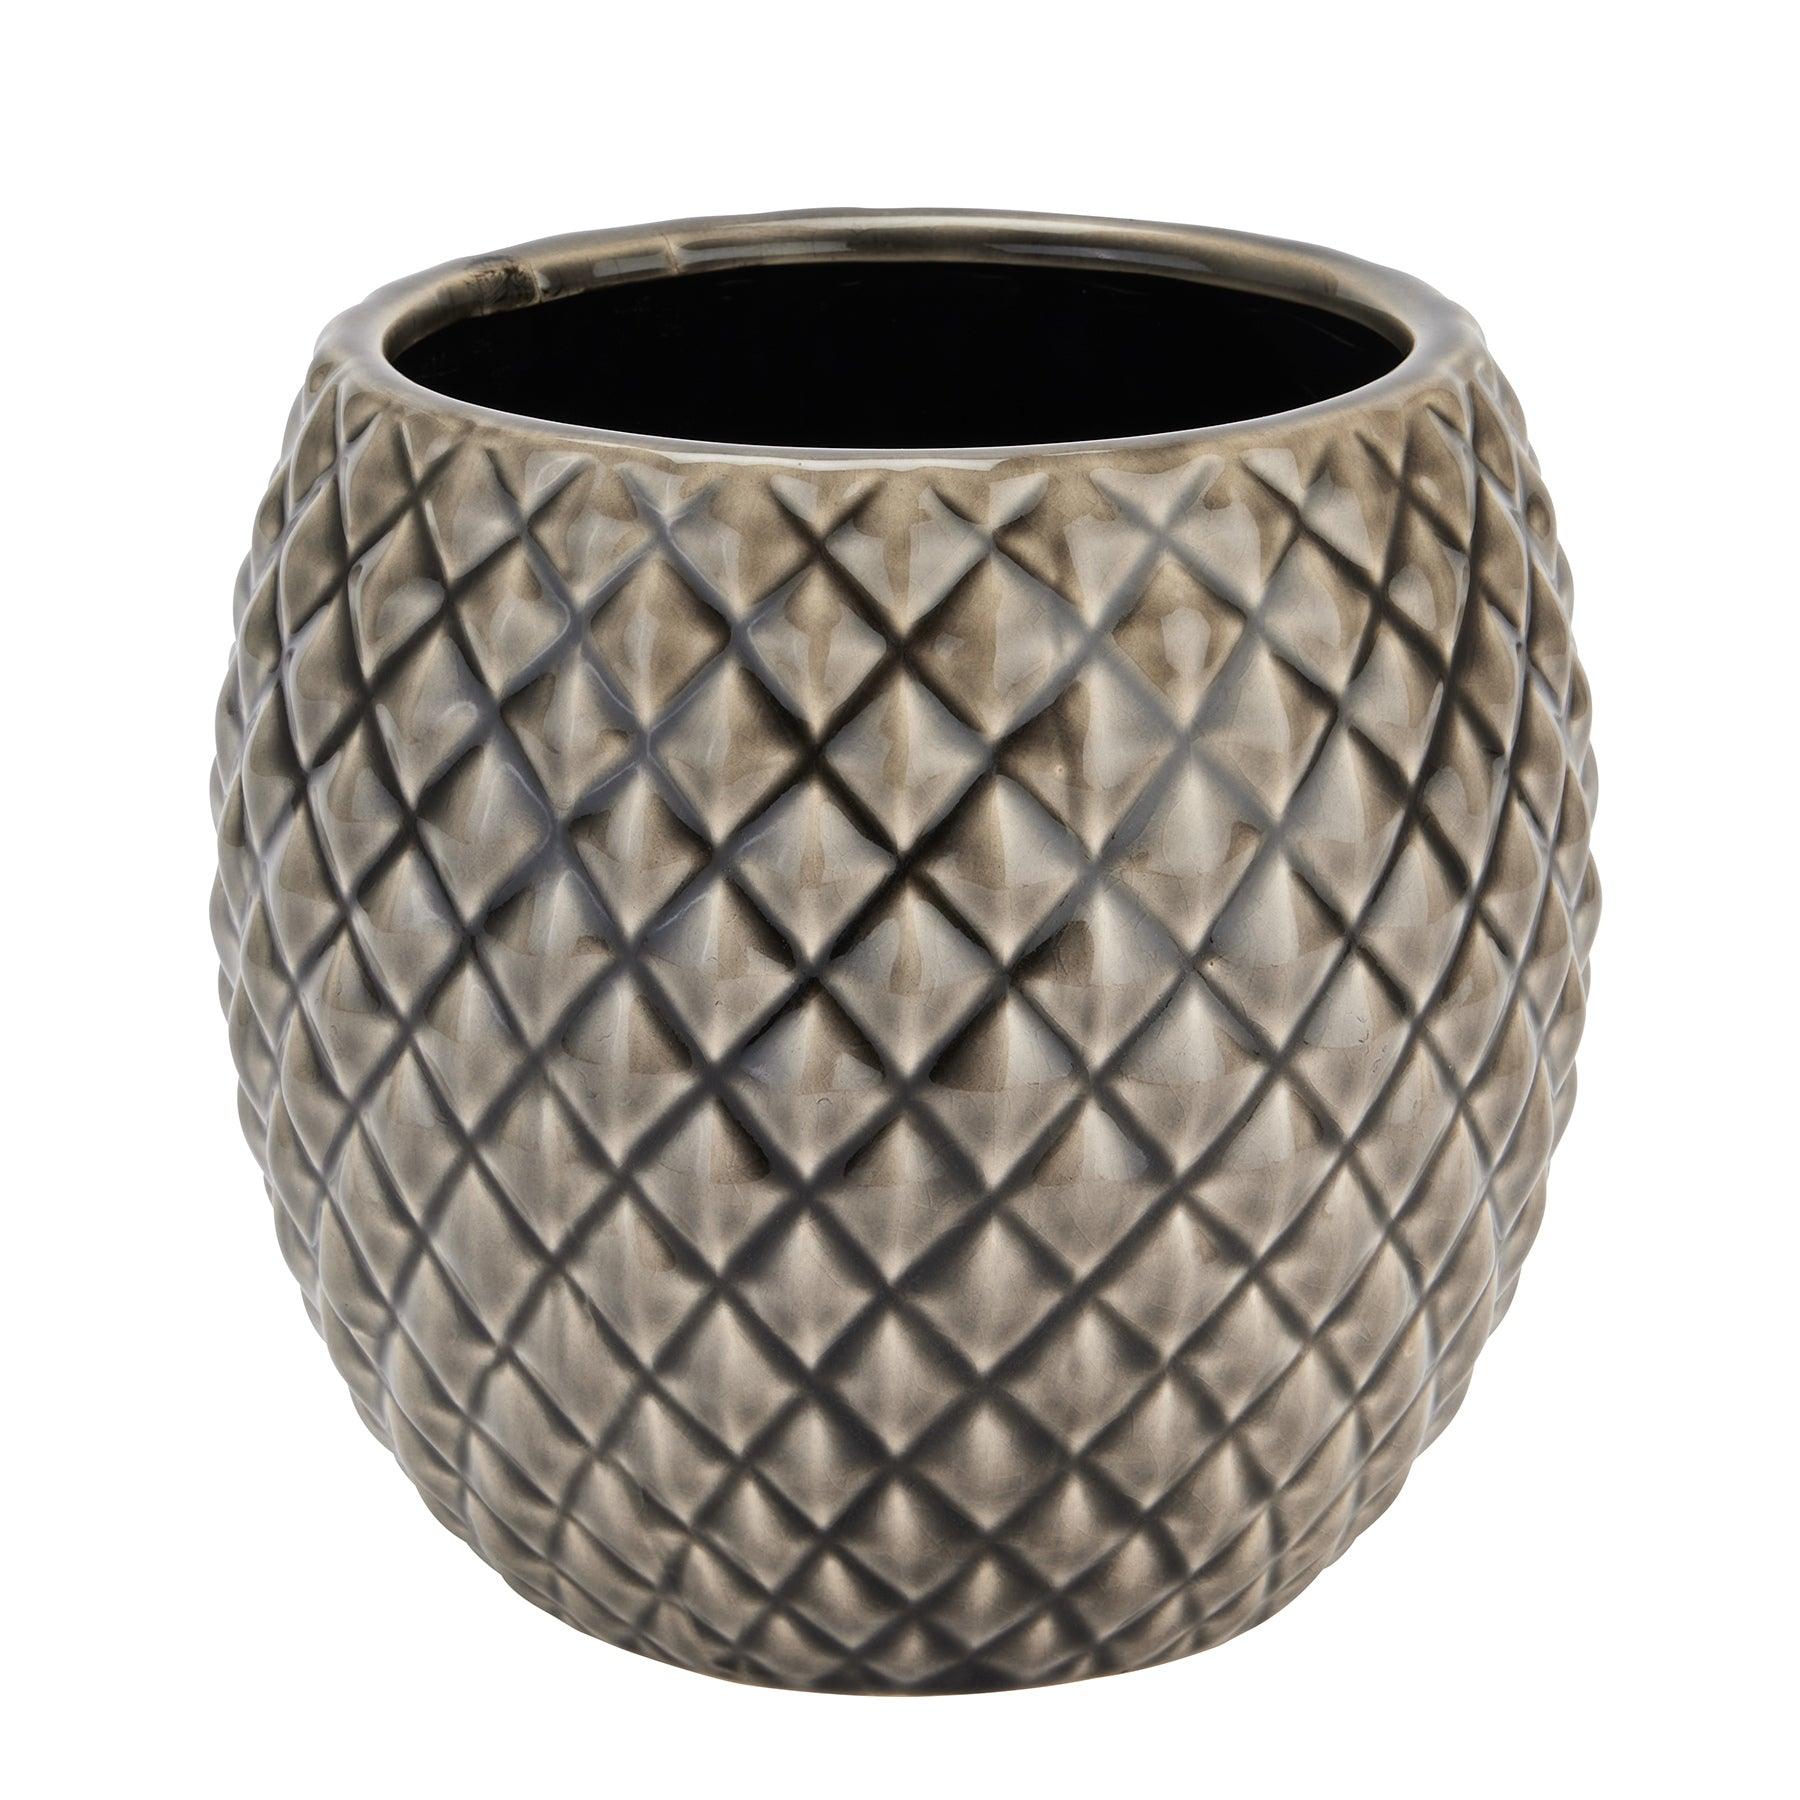 View Seville Collection Grey Diamond Planter information